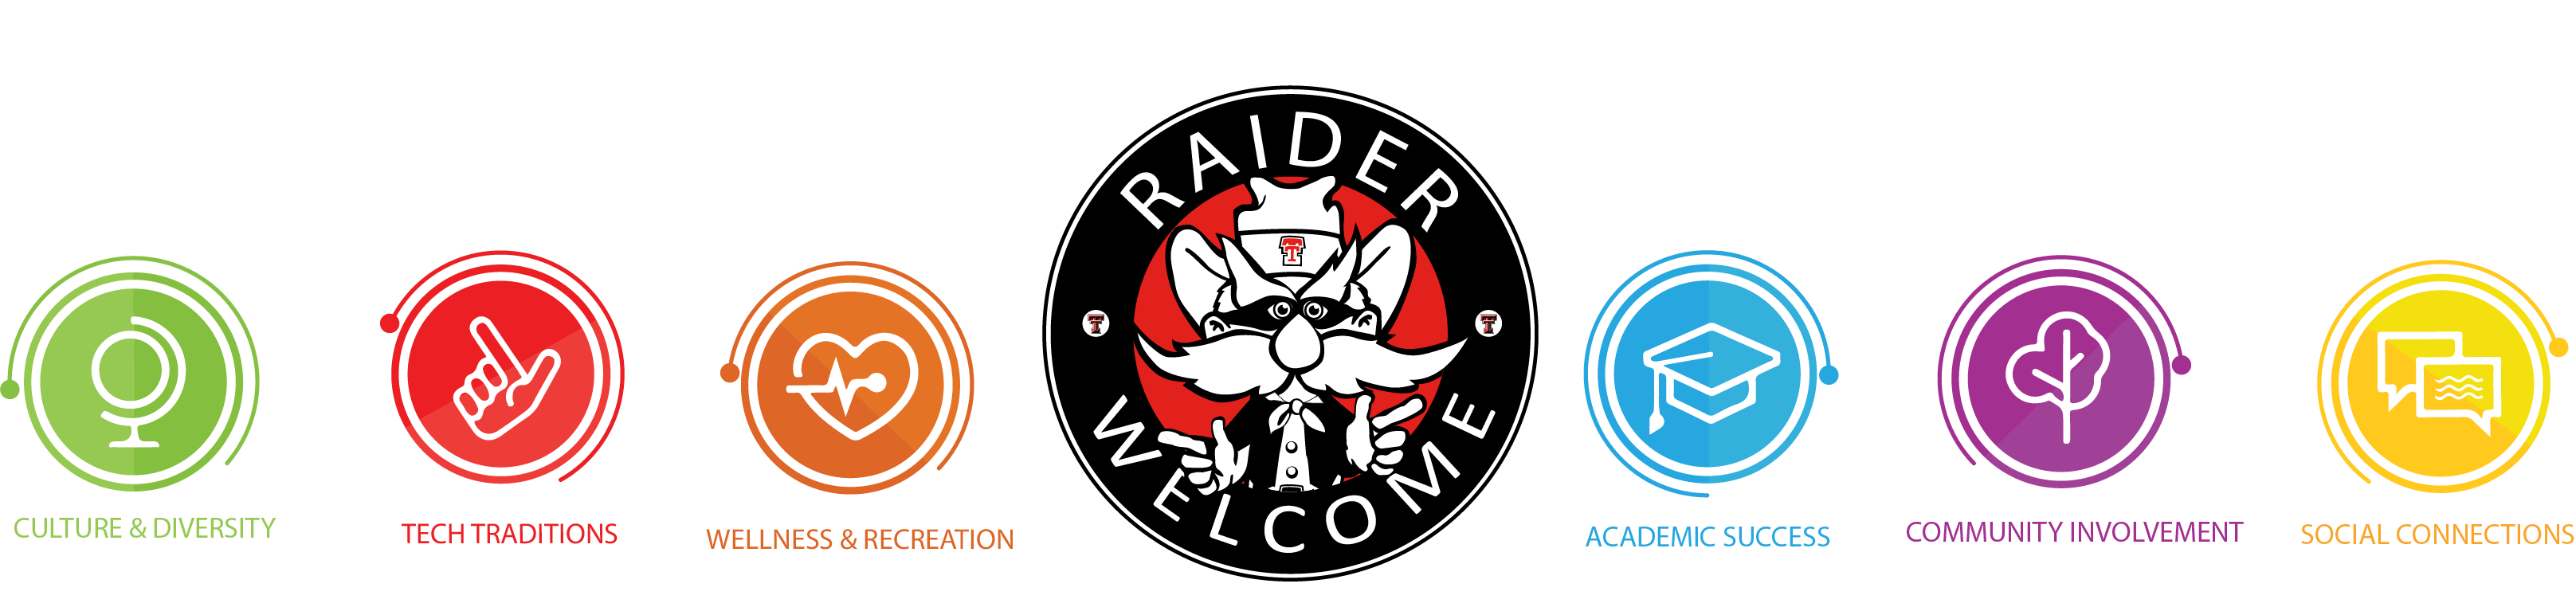 Raider Welcome logo with six tracks listed: Academic Success Social Connections Culture & Diversity Community Involvement Tech Traditions